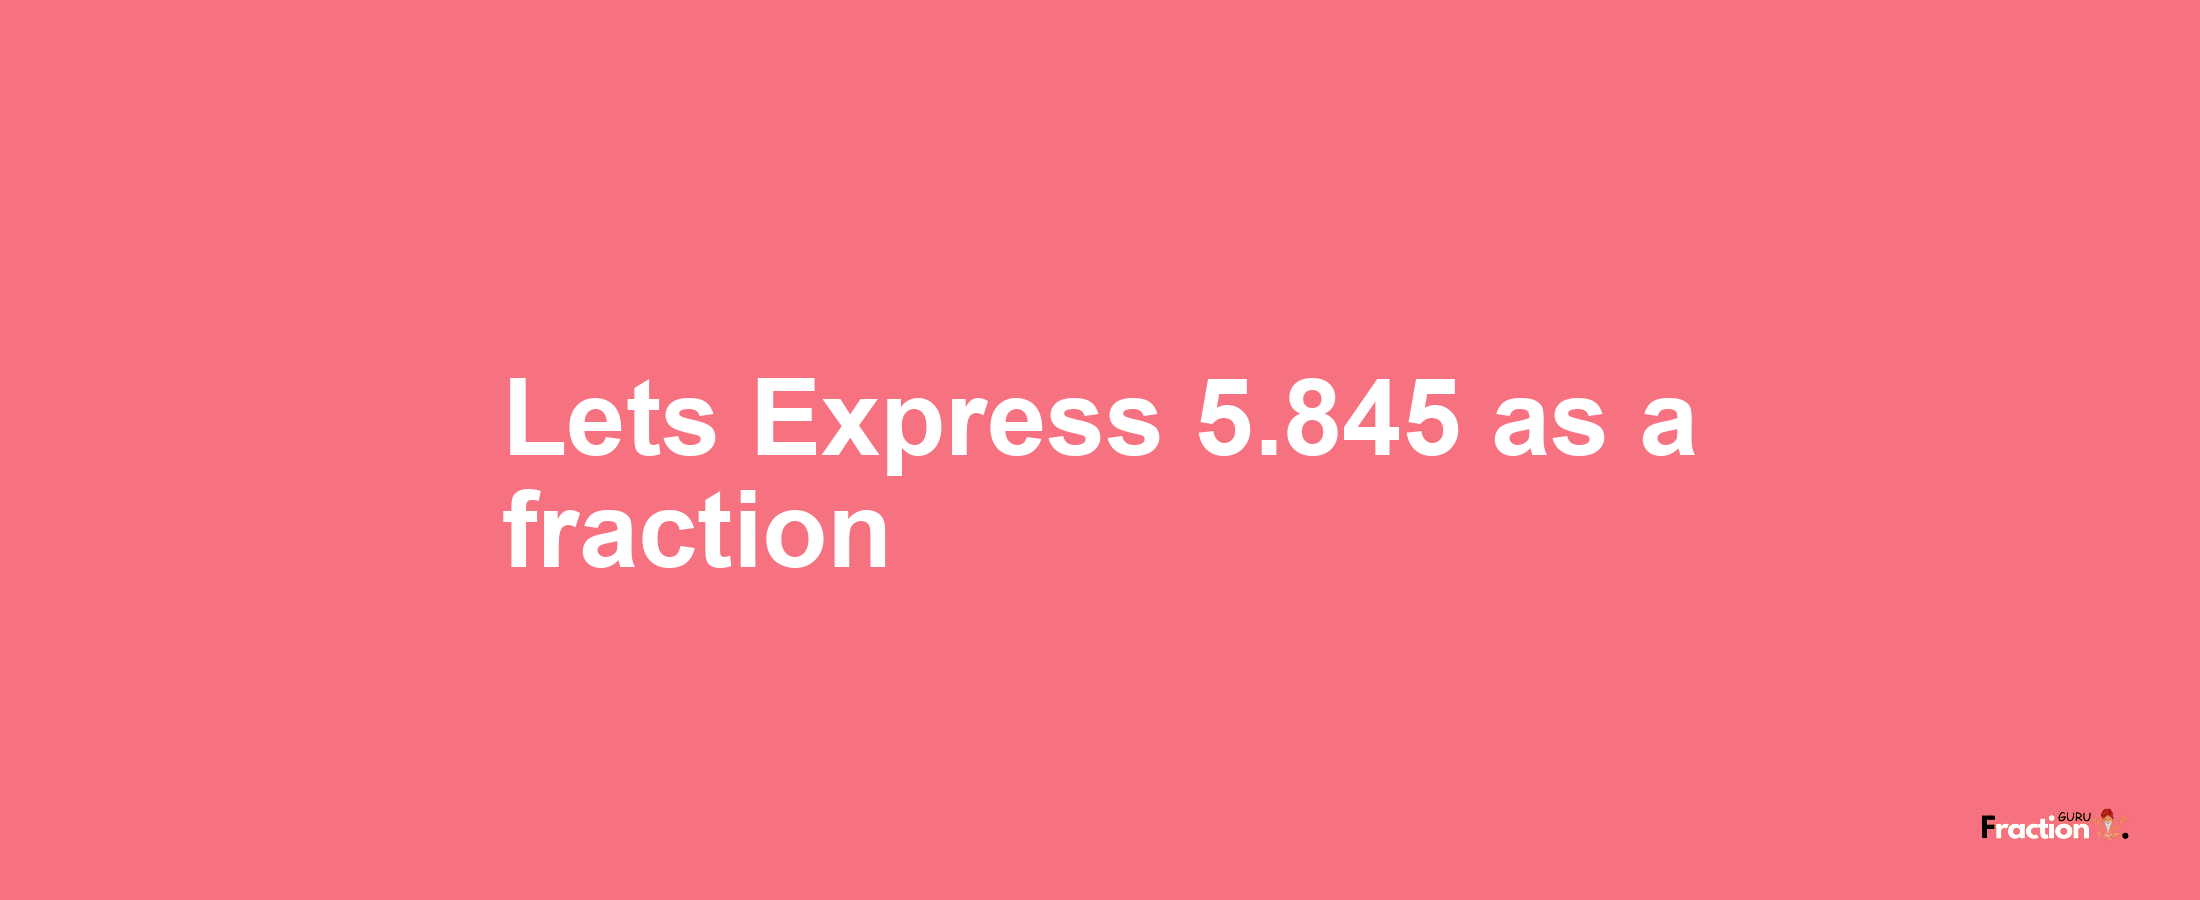 Lets Express 5.845 as afraction